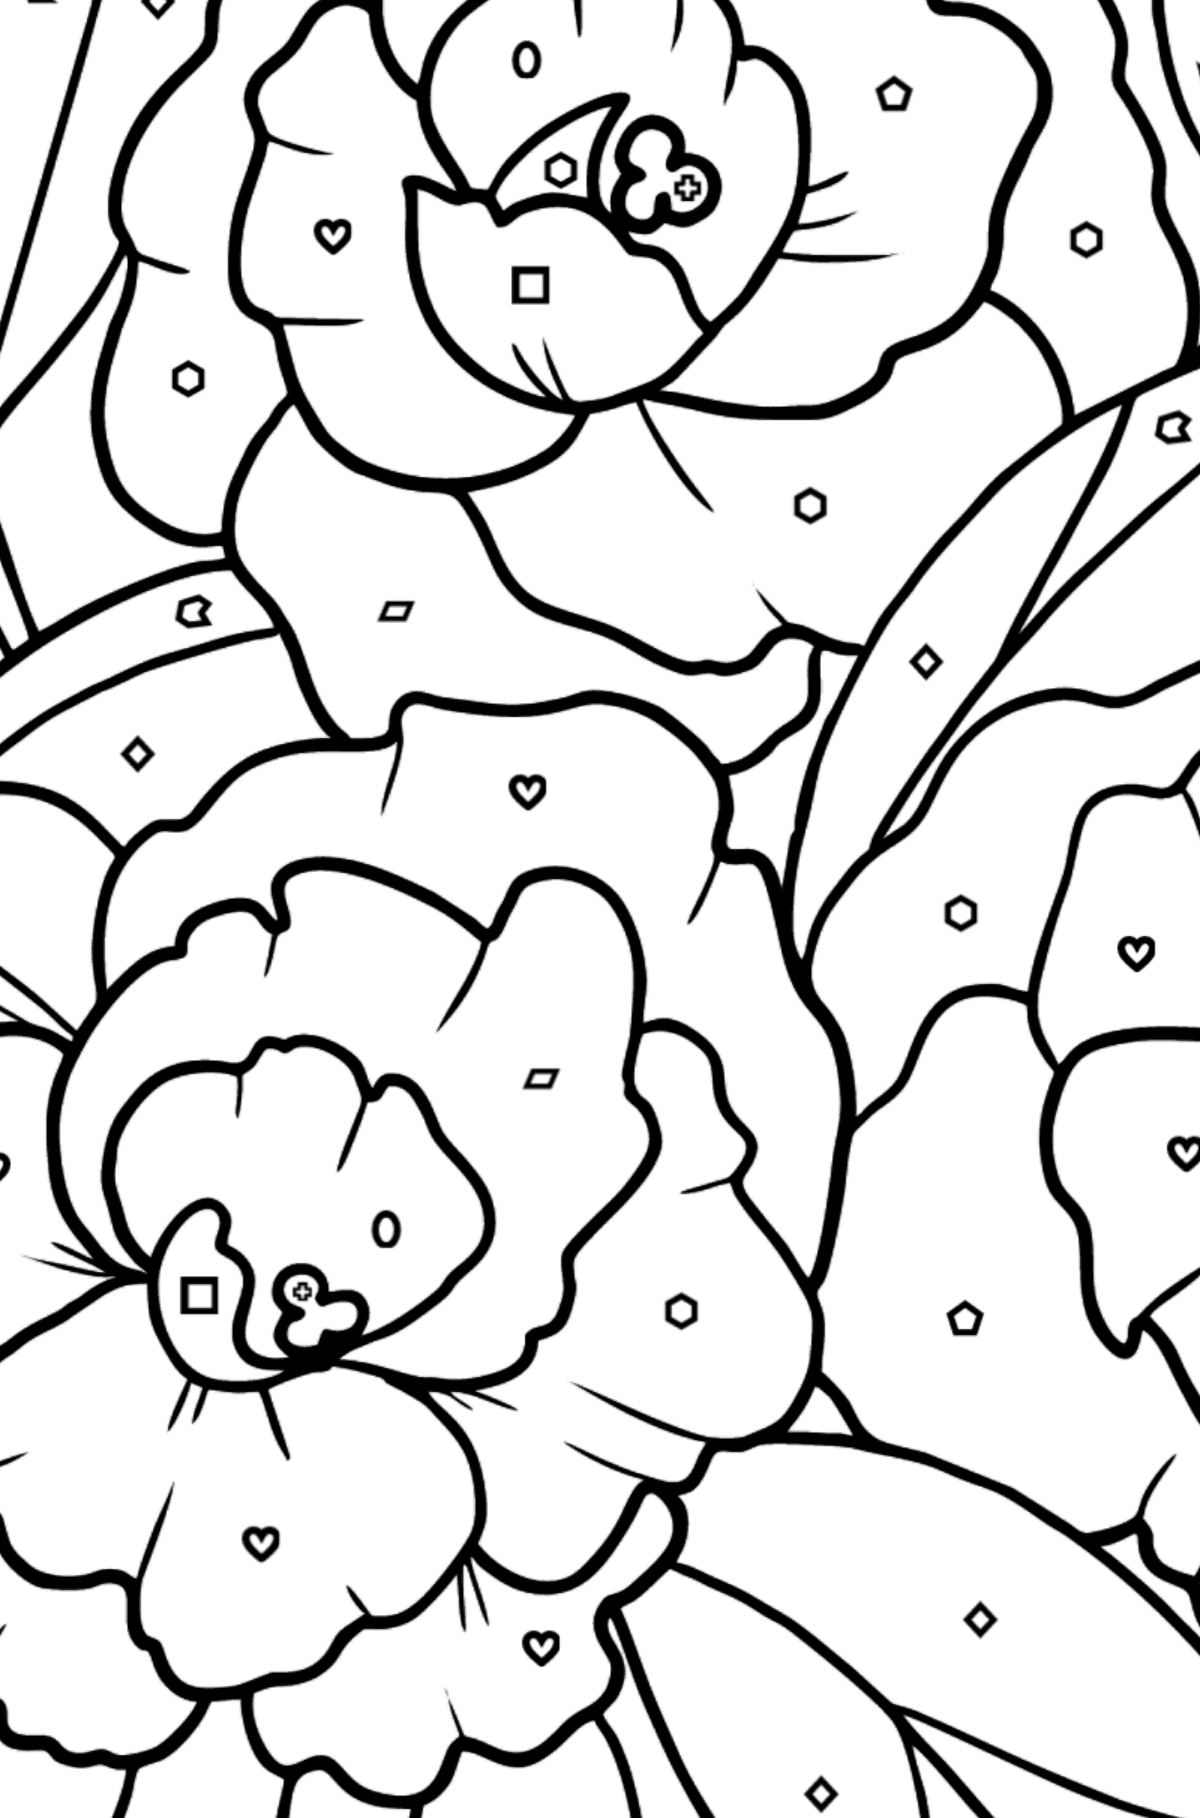 Flower Coloring Page - A Peony Blossom - Coloring by Geometric Shapes for Kids